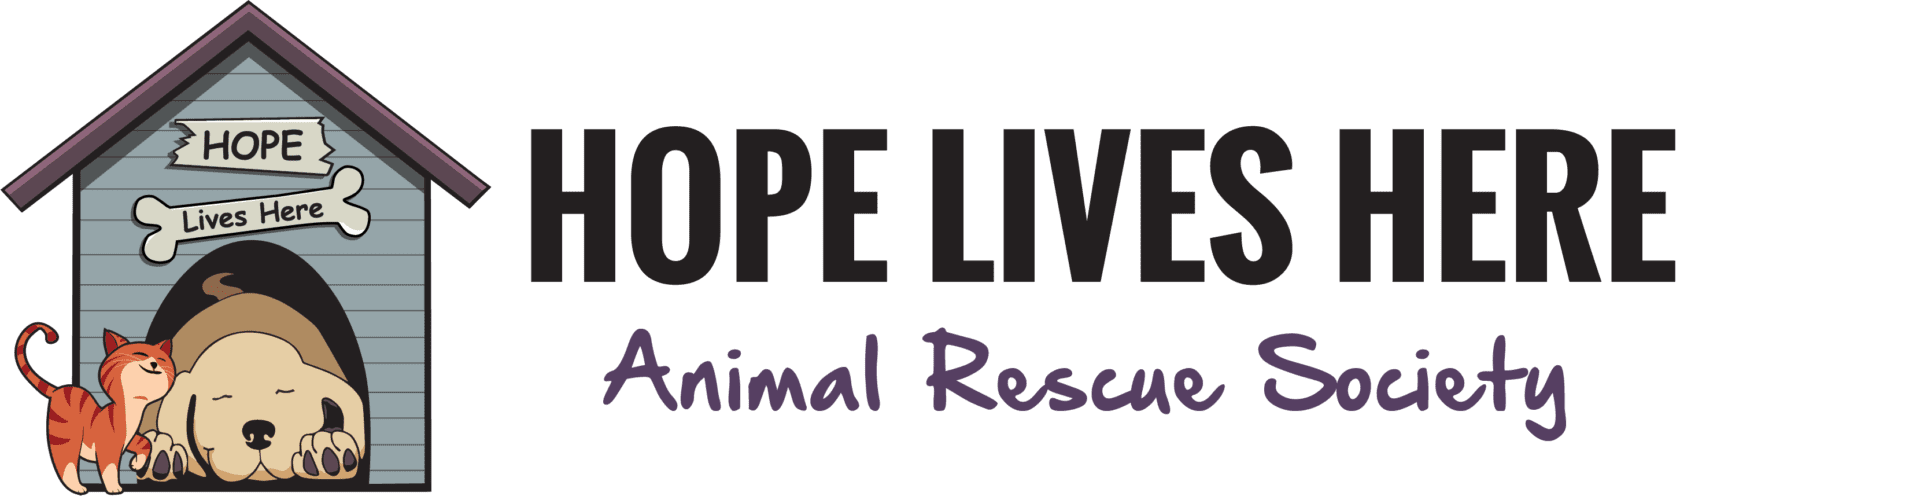 Hope Lives Here Animal Rescue, Giving Hope to Animals in Need